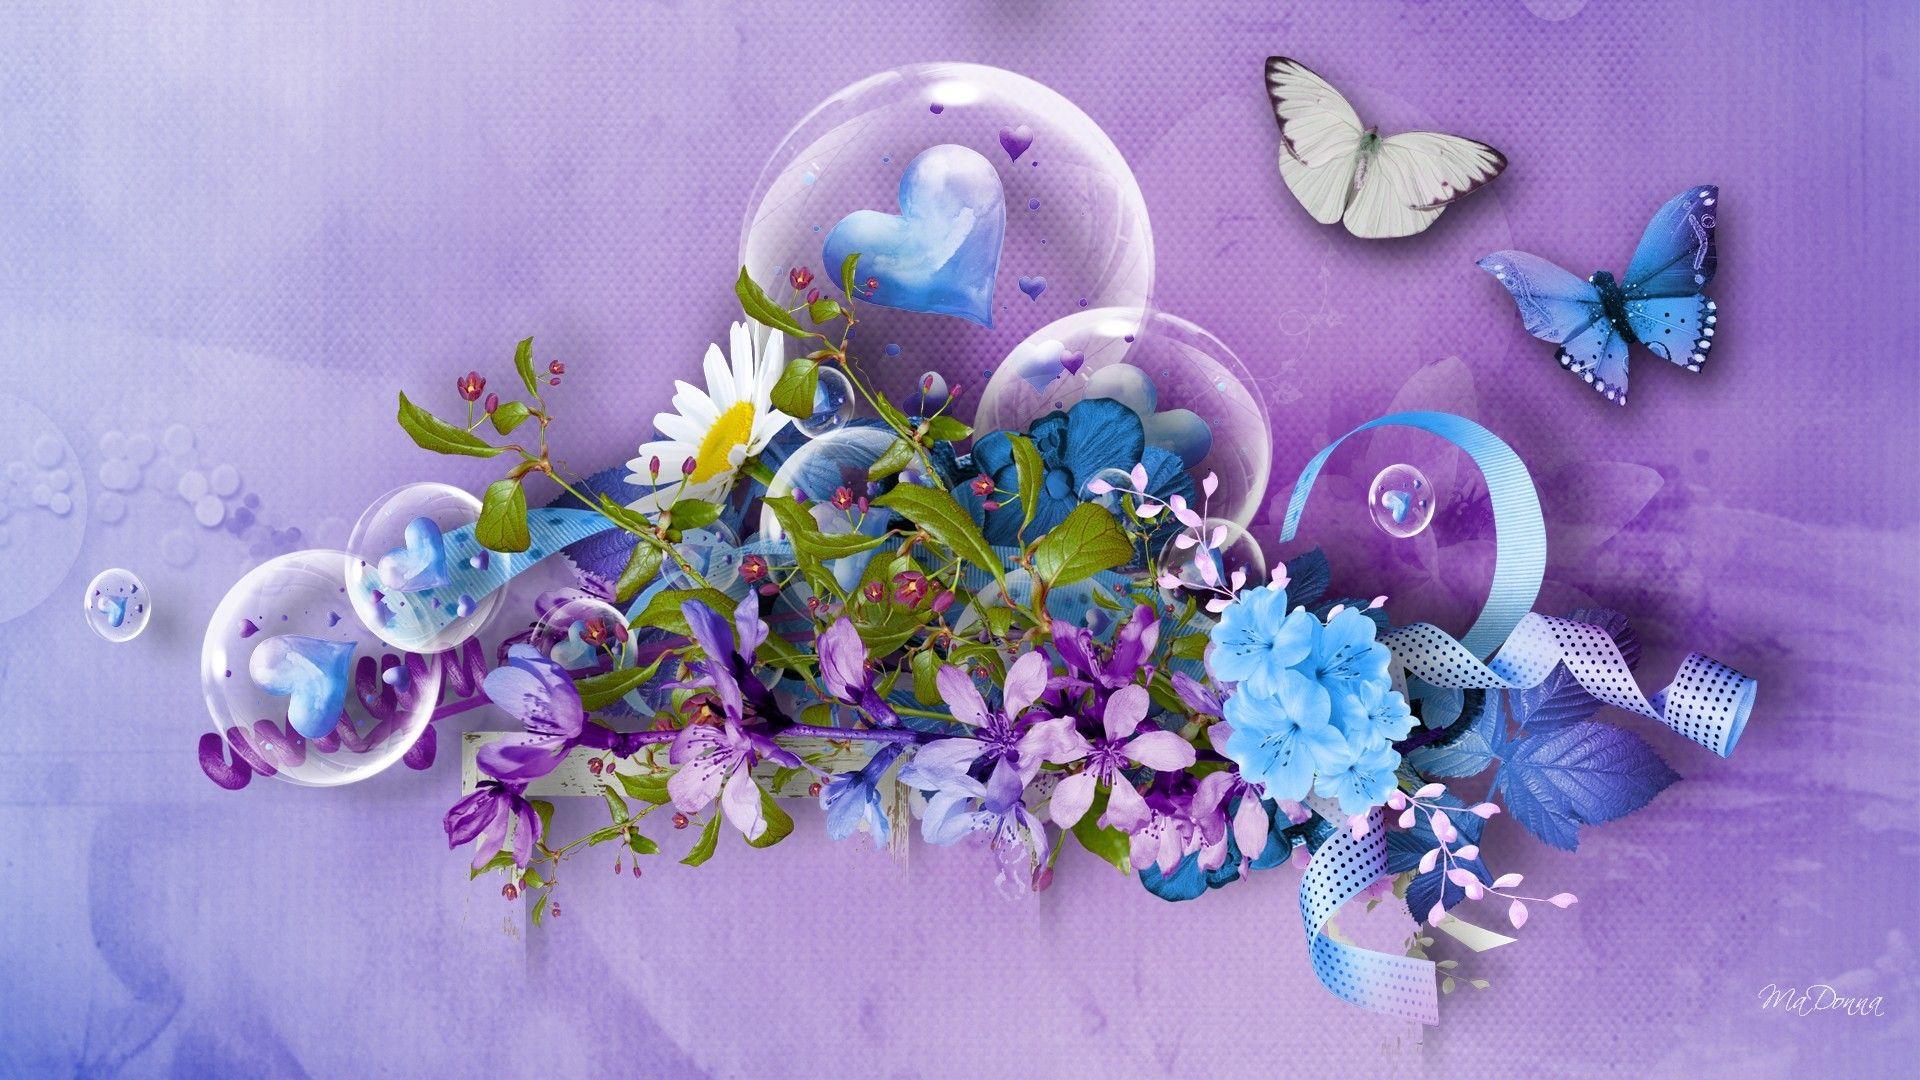 Heart and Flowers and Butterflies Wallpaper at